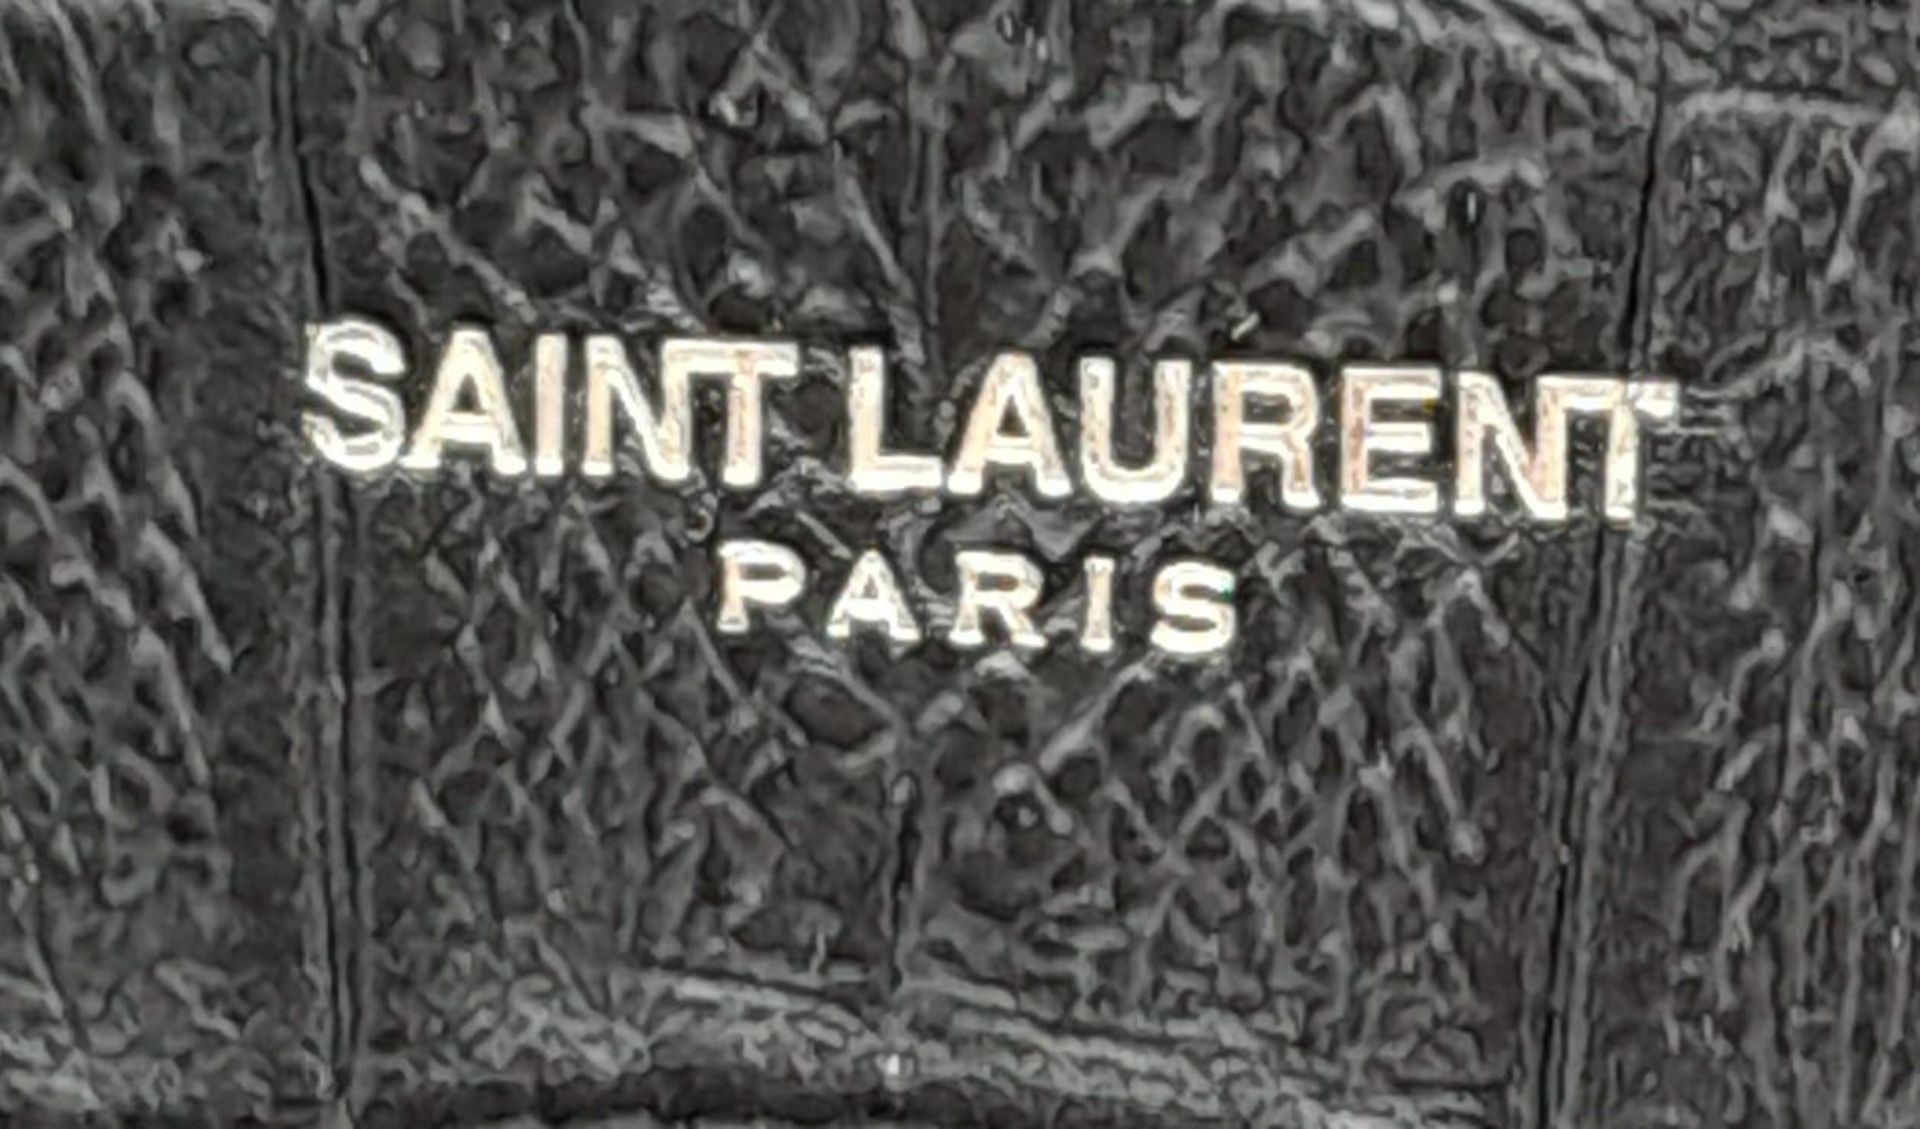 A Saint Laurent Sac de Jour Handbag. Crocodile embossed leather exterior with silver hardware and - Image 21 of 21